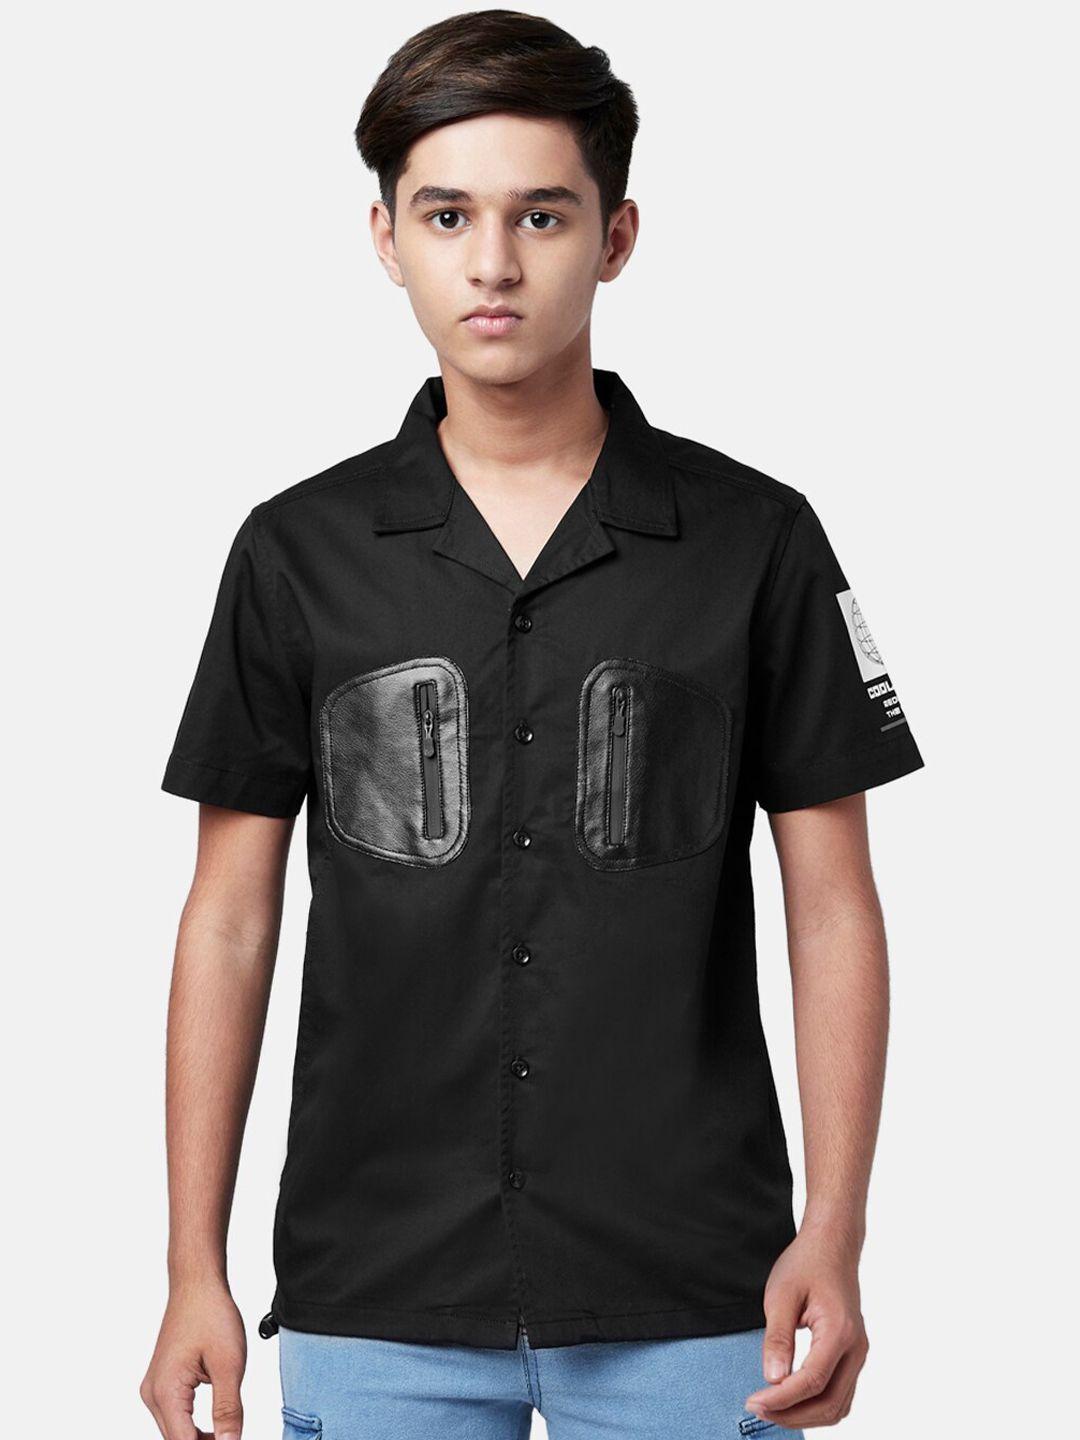 coolsters by pantaloons boys black solid casual shirt